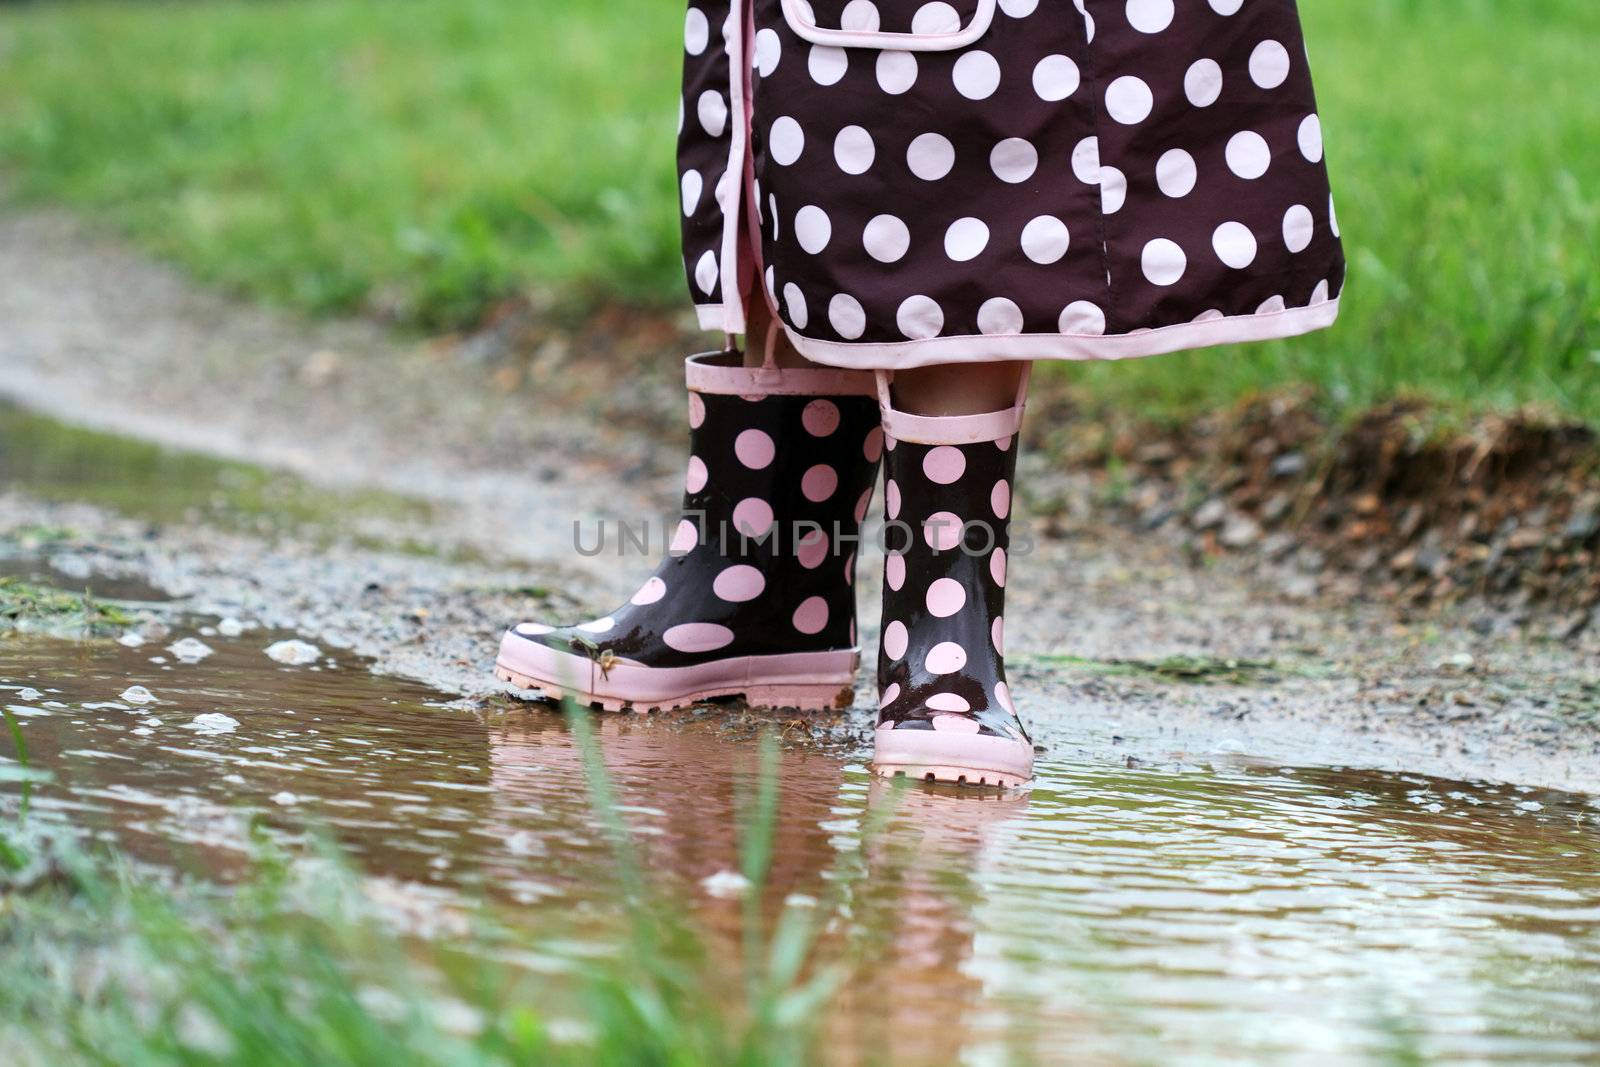 Rainboots and Mud Puddles by StephanieFrey